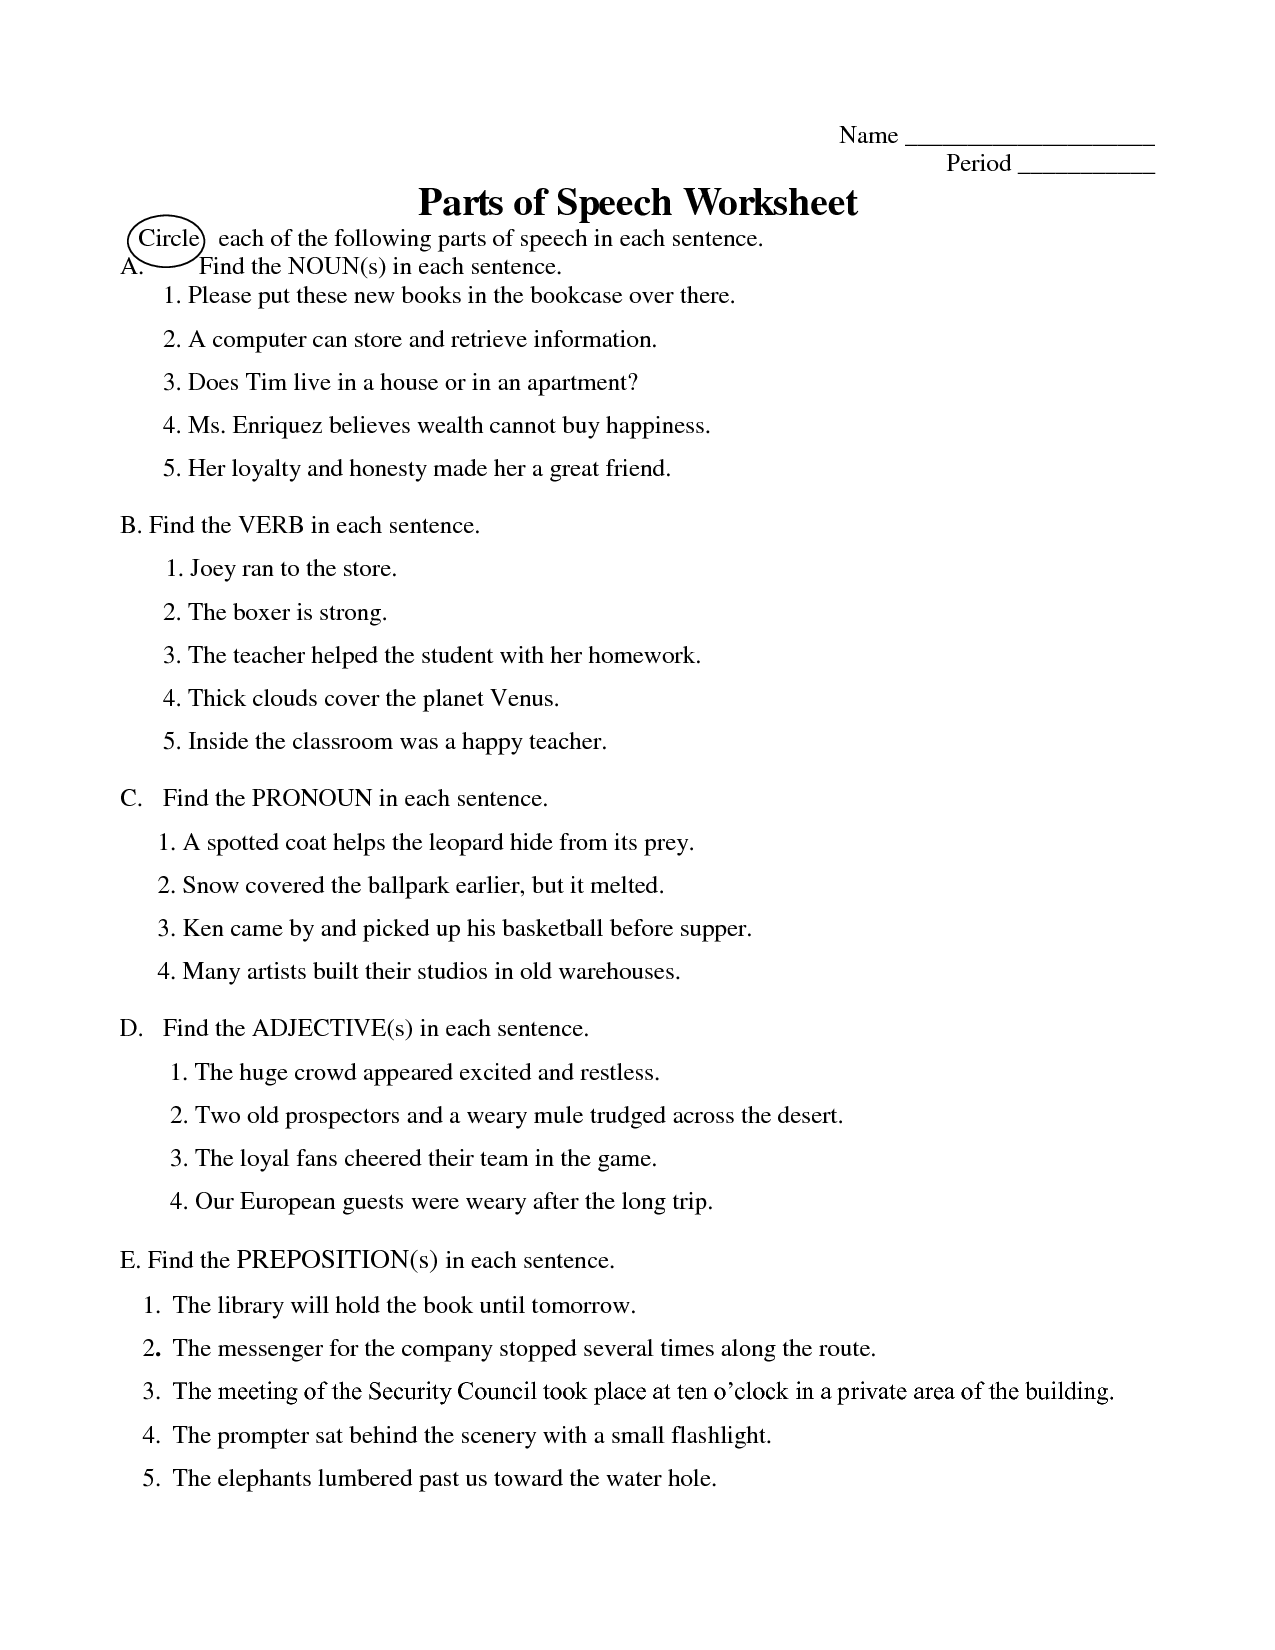 parts-of-speech-worksheets-college-andreyanews